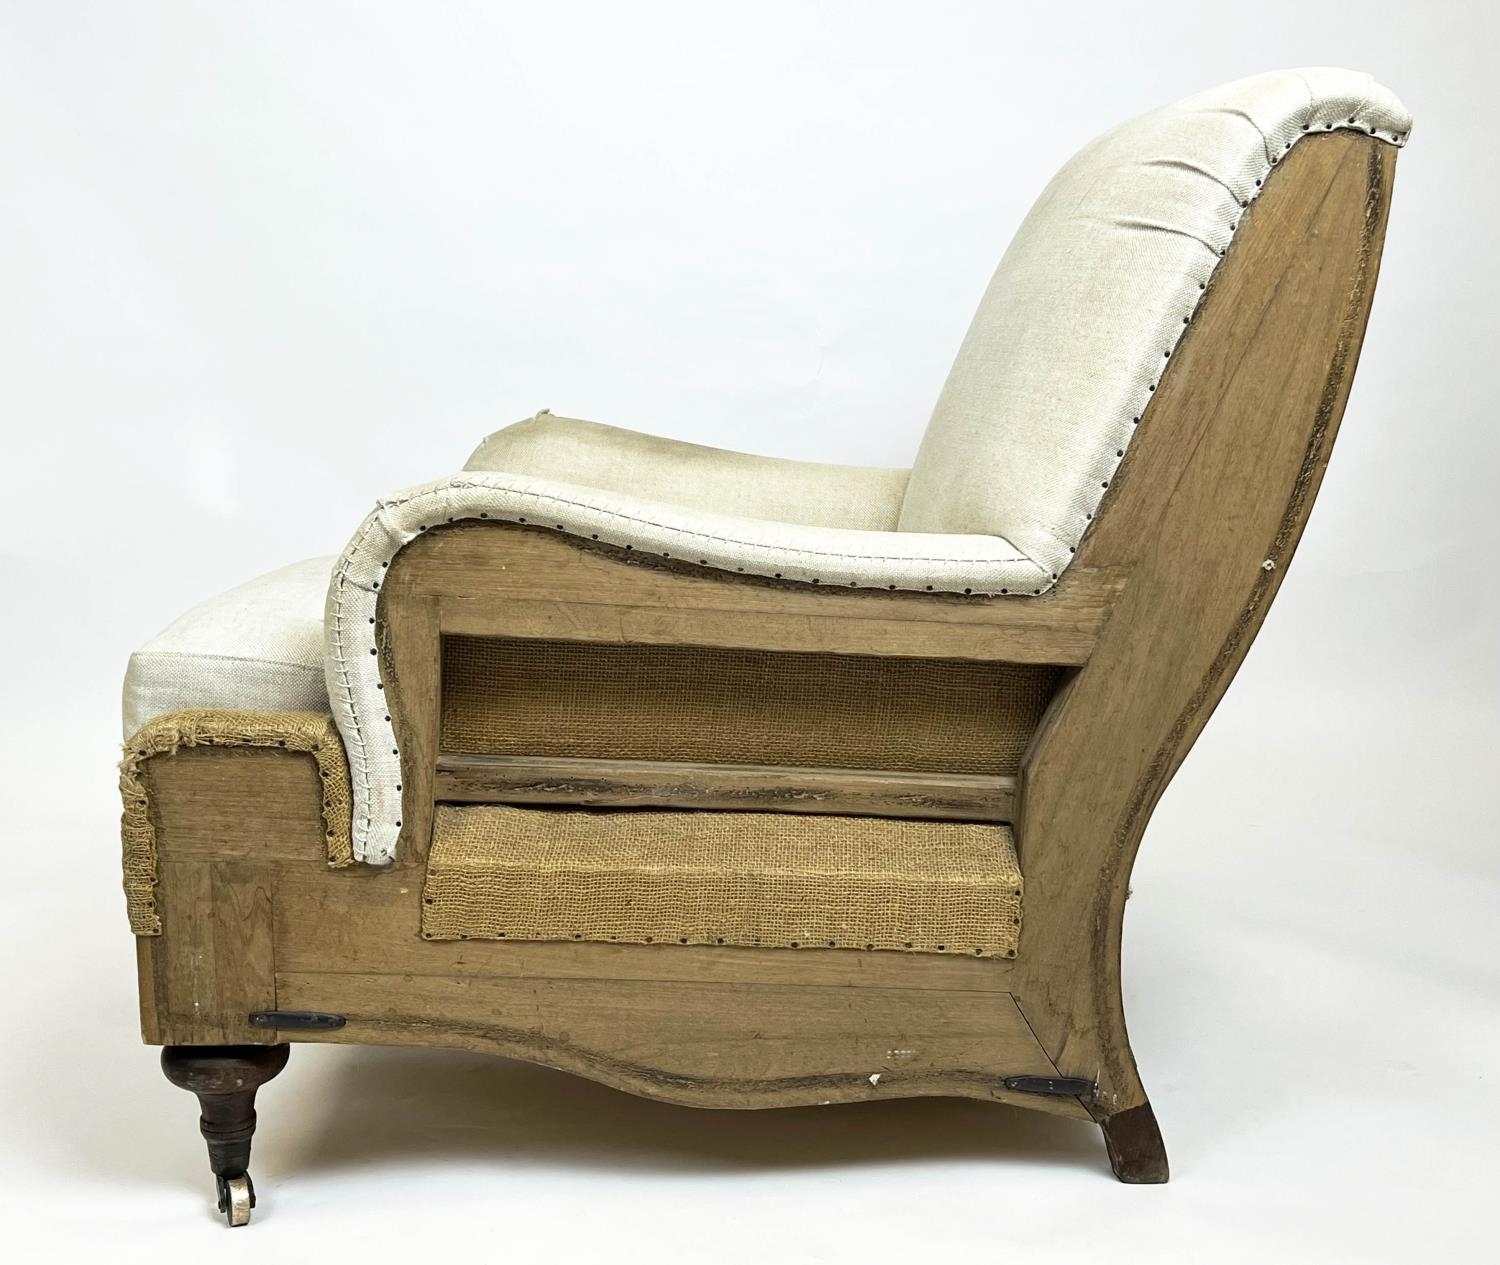 HOWARD STYLE ARMCHAIR, by Van Thiel & Co, deconstructed linen and hessian upholstered, 75cm x 89cm - Image 5 of 5